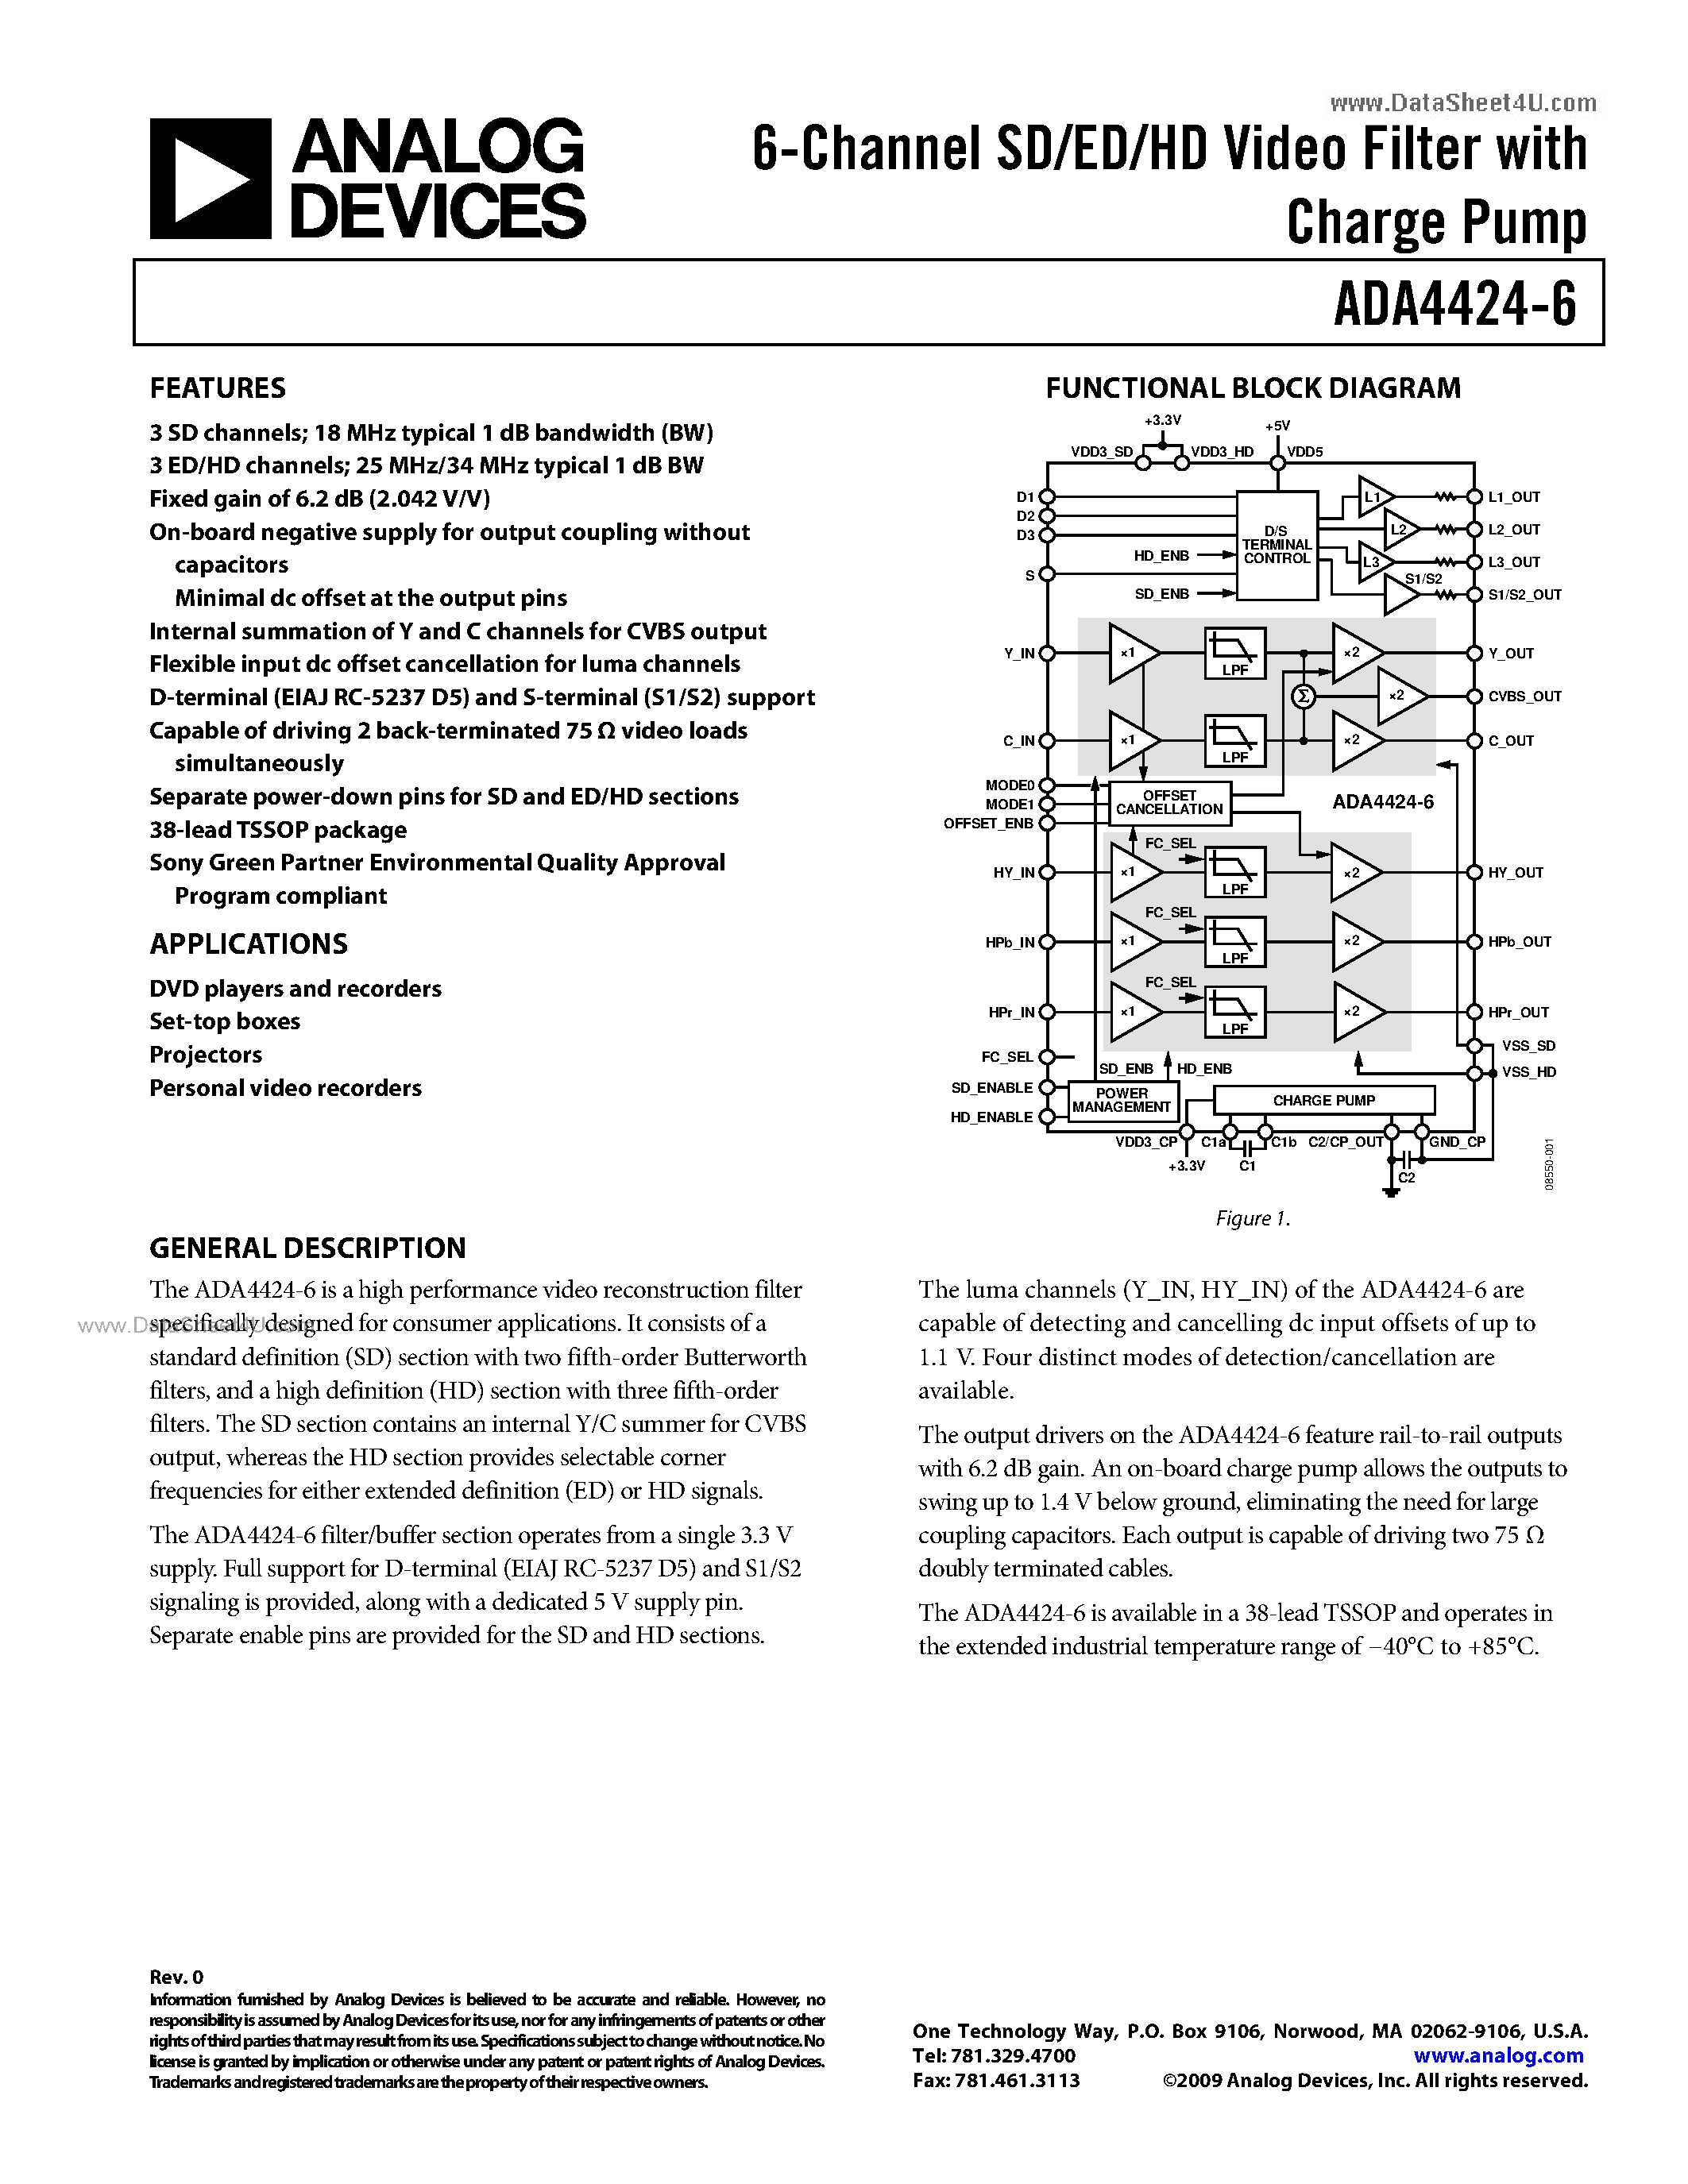 Datasheet ADA4424-6 - 6-Channel SD/ED/HD Video Filter page 1